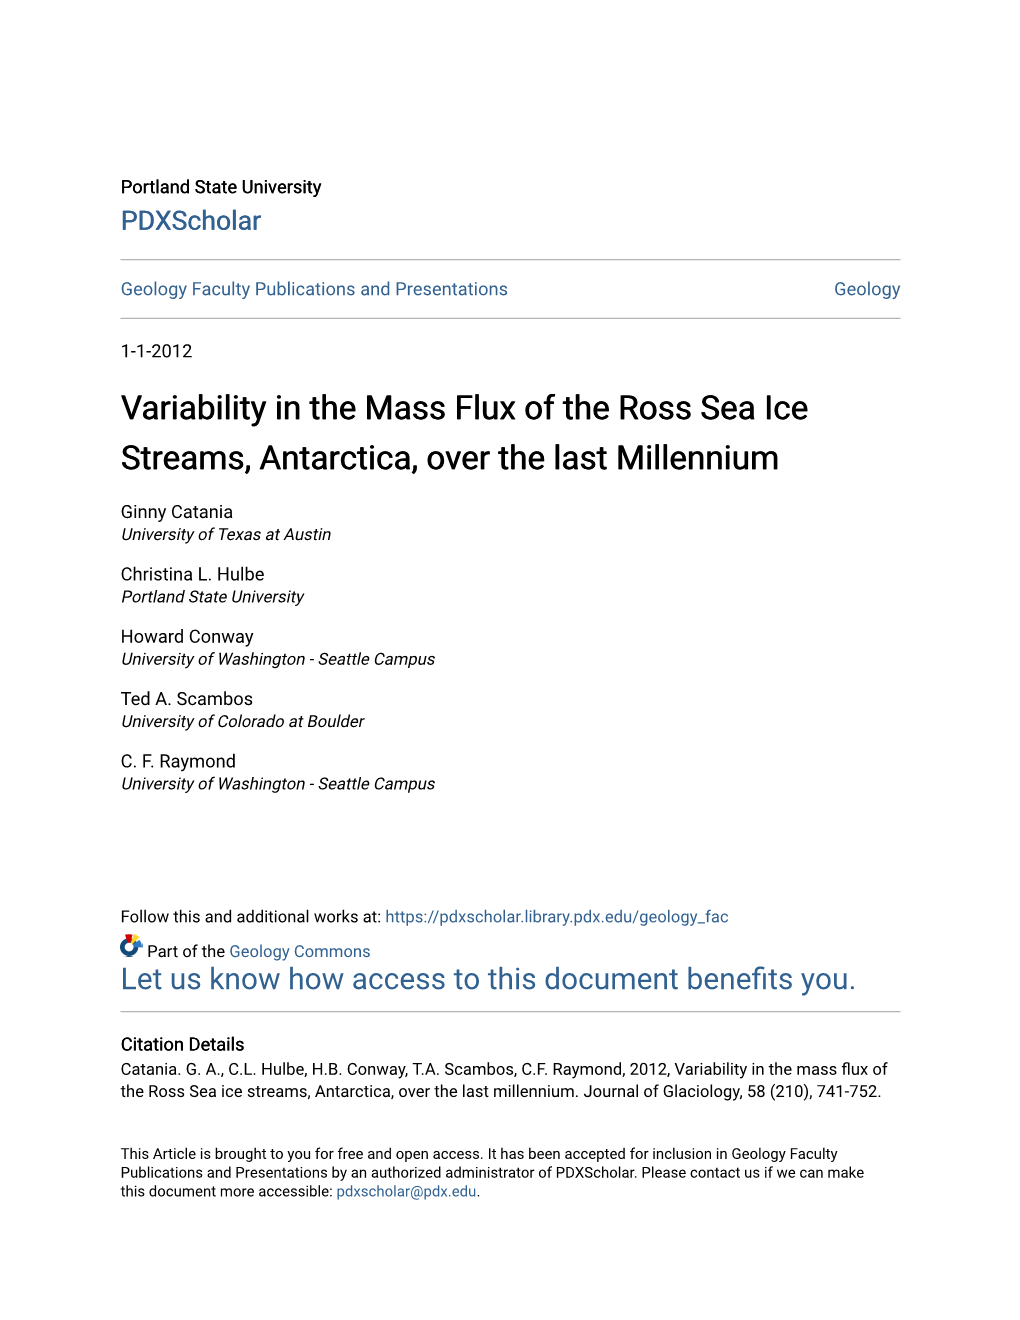 Variability in the Mass Flux of the Ross Sea Ice Streams, Antarctica, Over the Last Millennium